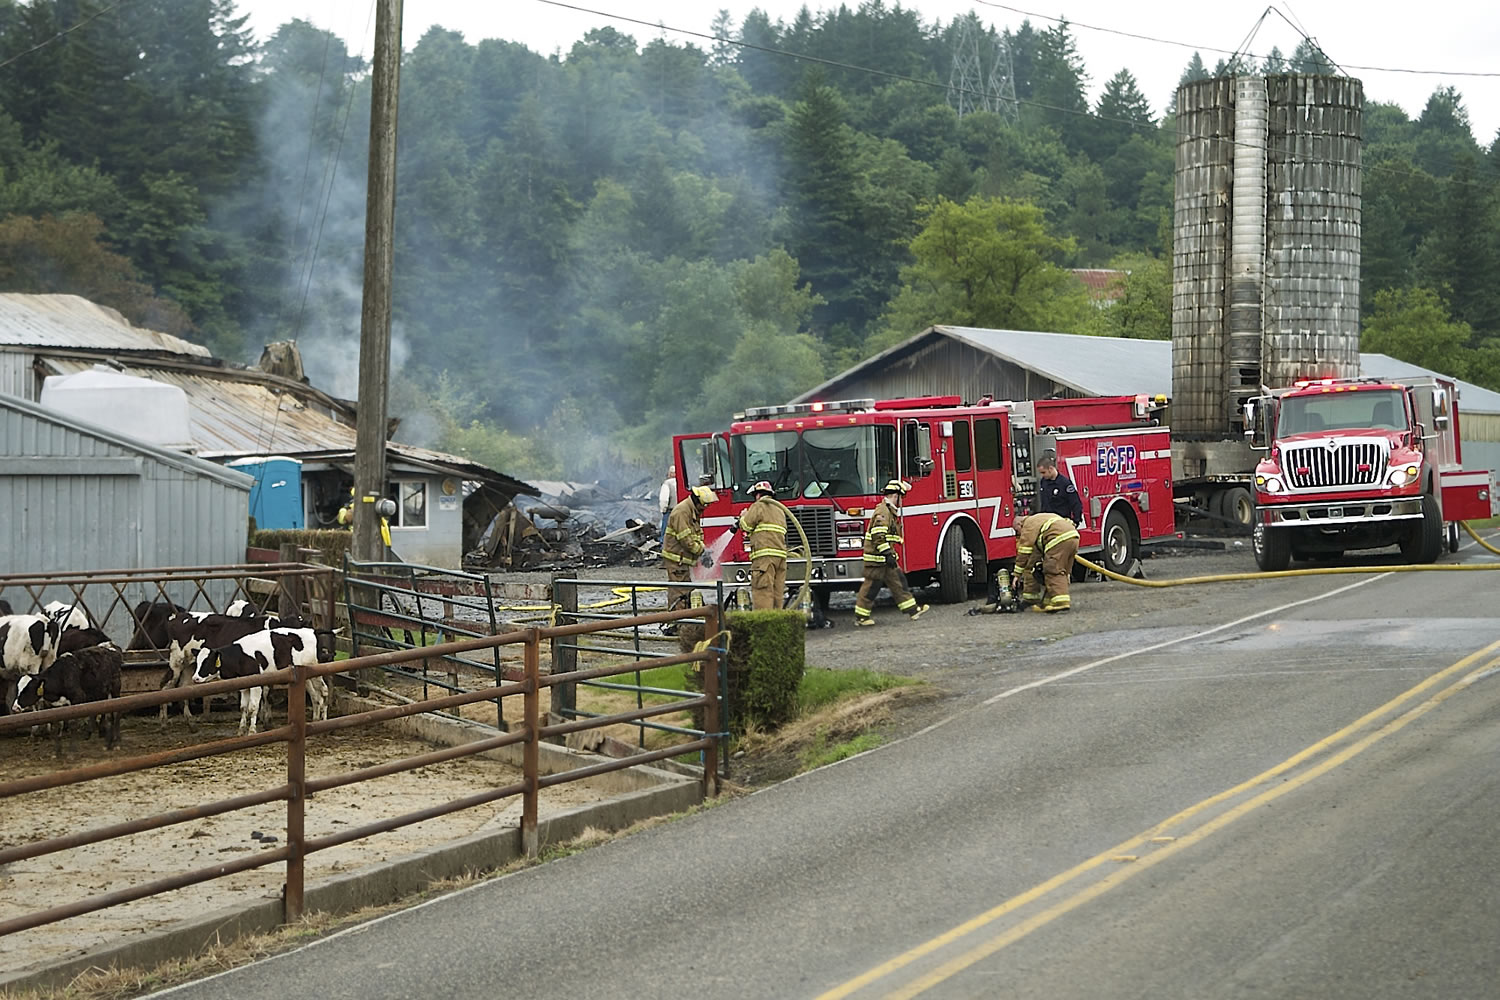 Firefighters returned to Stauffer's Dairy Farm near Washougal on Monday morning after an overnight fire rekindled.